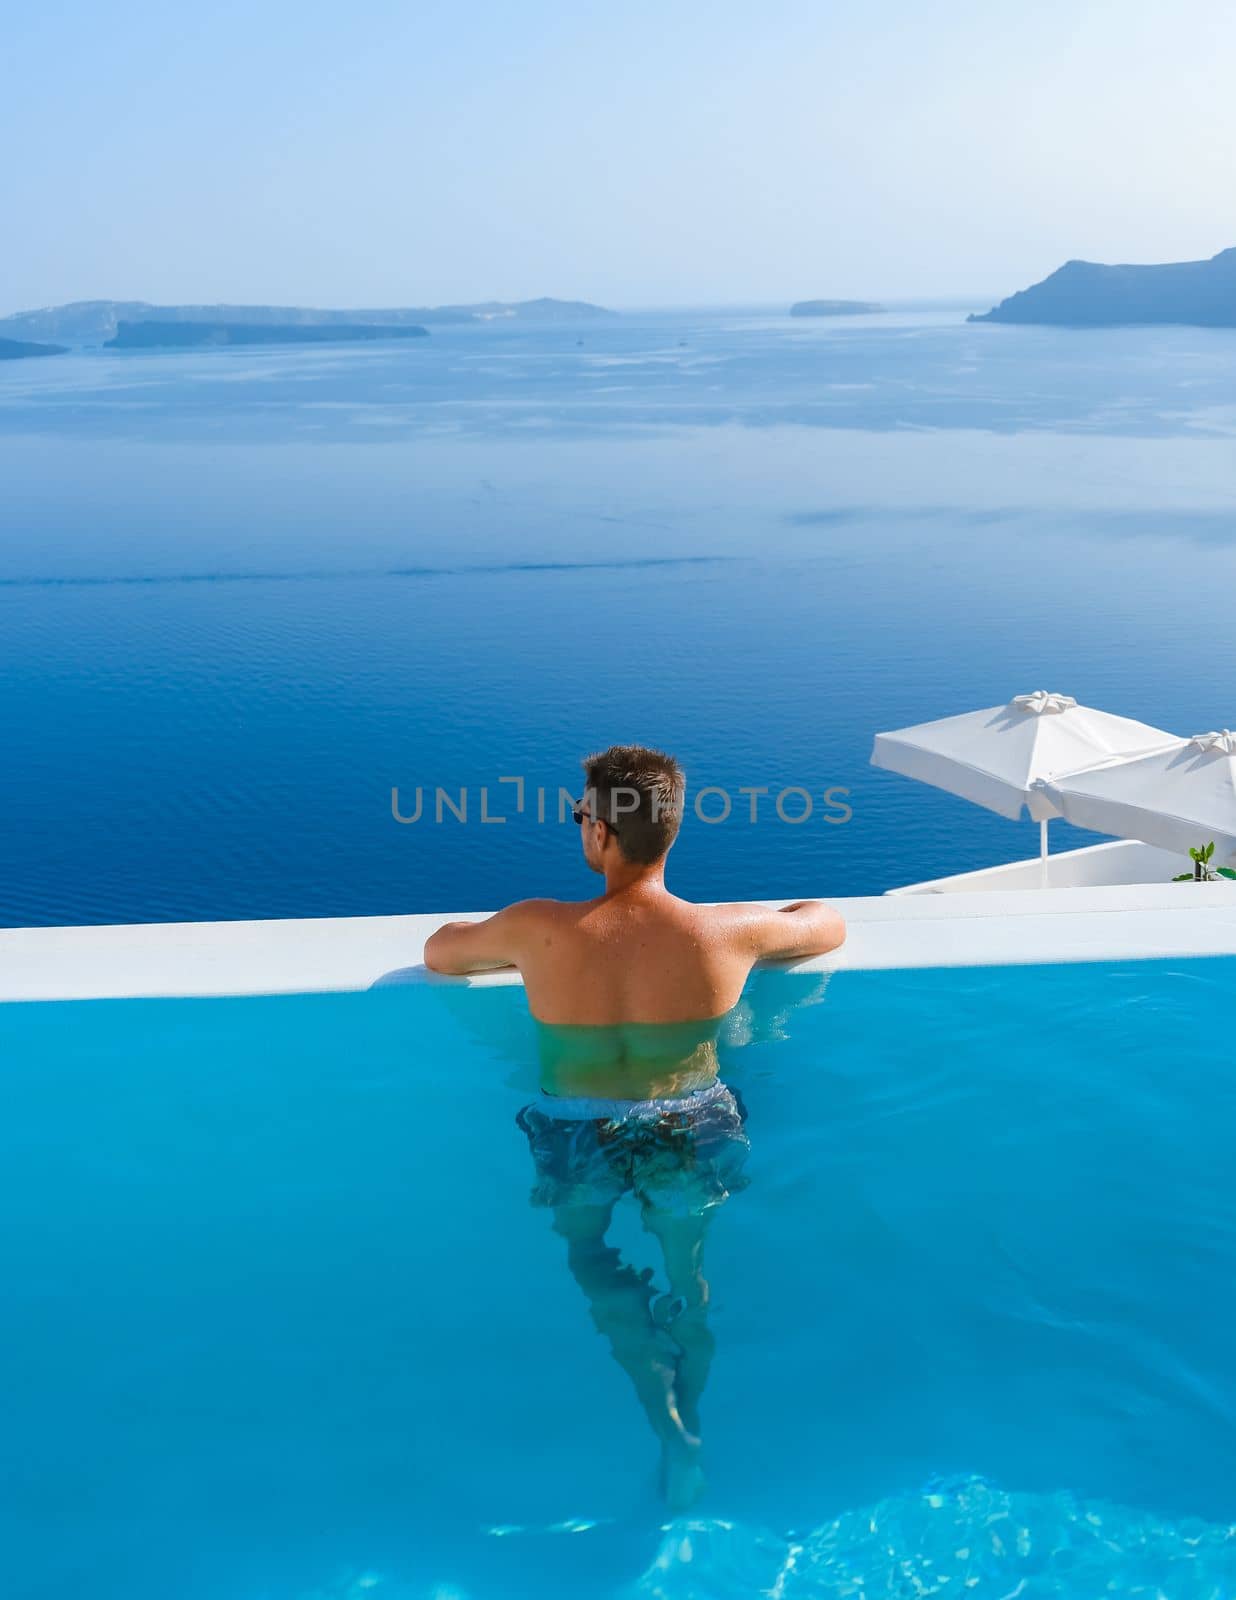 man relaxing in infinity swimming during vacation at Santorini, swimming pool looking out over the Caldera ocean of Santorini, Oia Greece, Greek Island Aegean Cyclades luxury vacation.